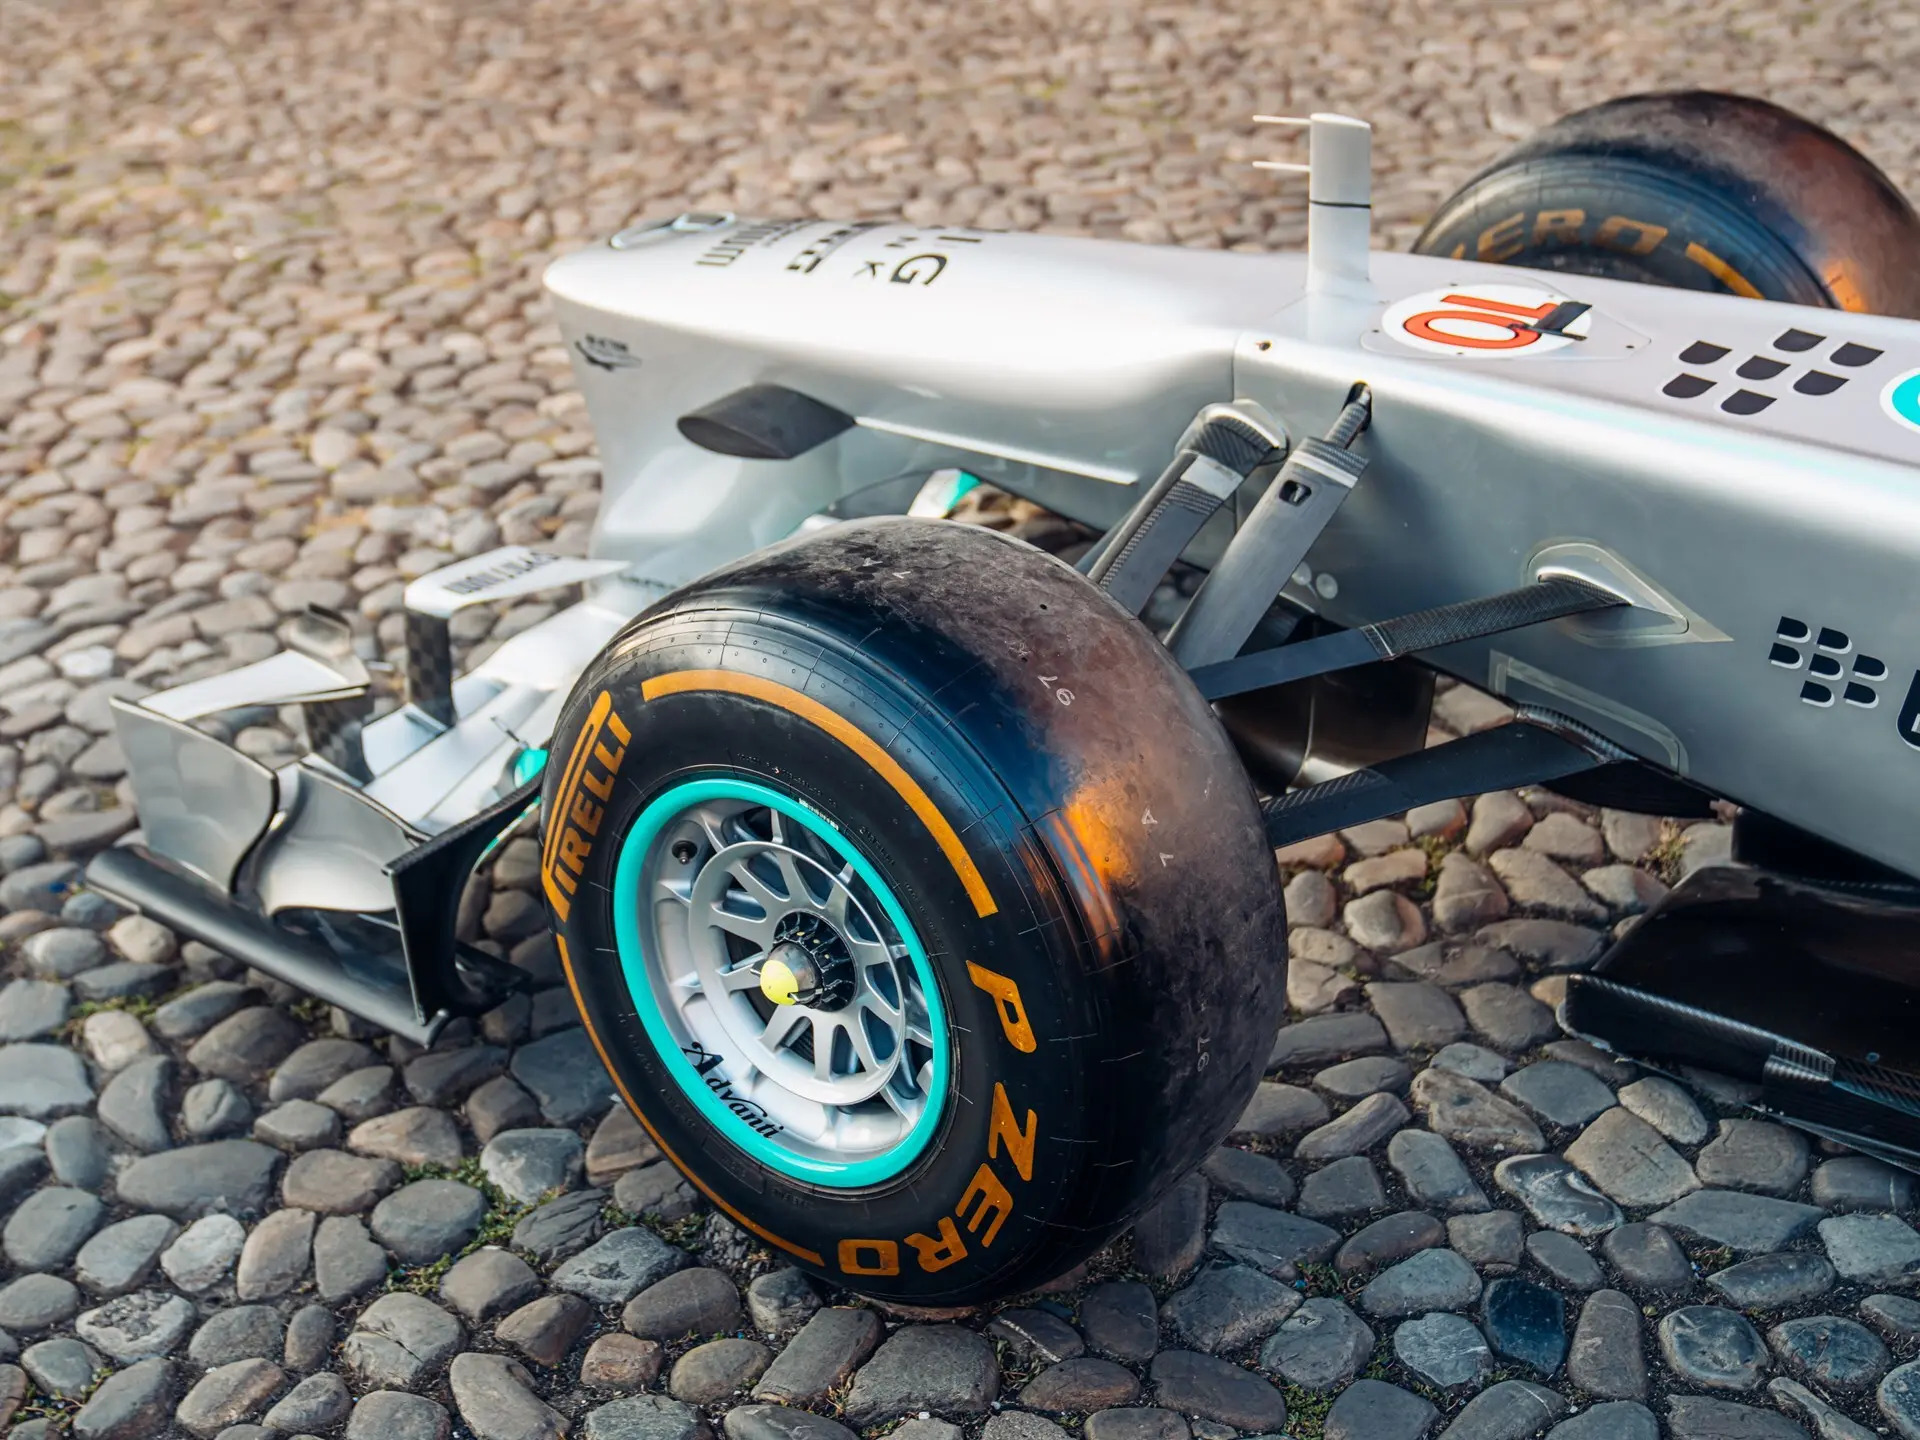 formula 1, lewis hamilton, mercedes-amg petronas, mercedes-benz, rm sotheby’s, the f1 car lewis hamilton drove in his first win for mercedes is going on auction